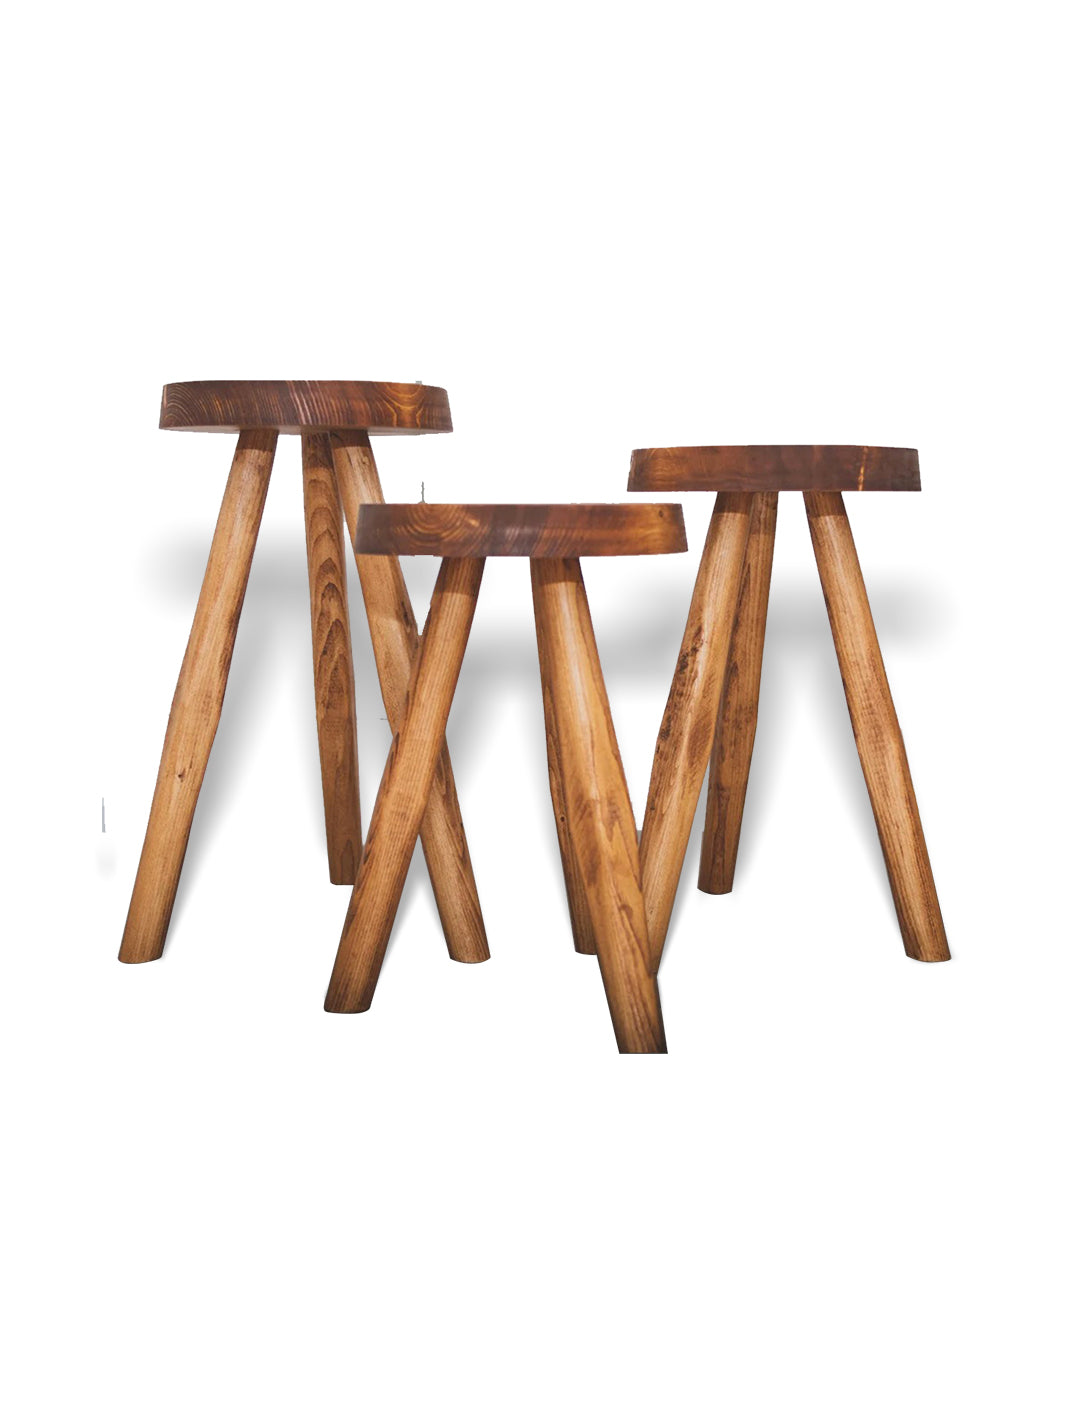 Handcrafted Wooden Tripod Round Top Stool | Plant Stand FTN  FTN0001